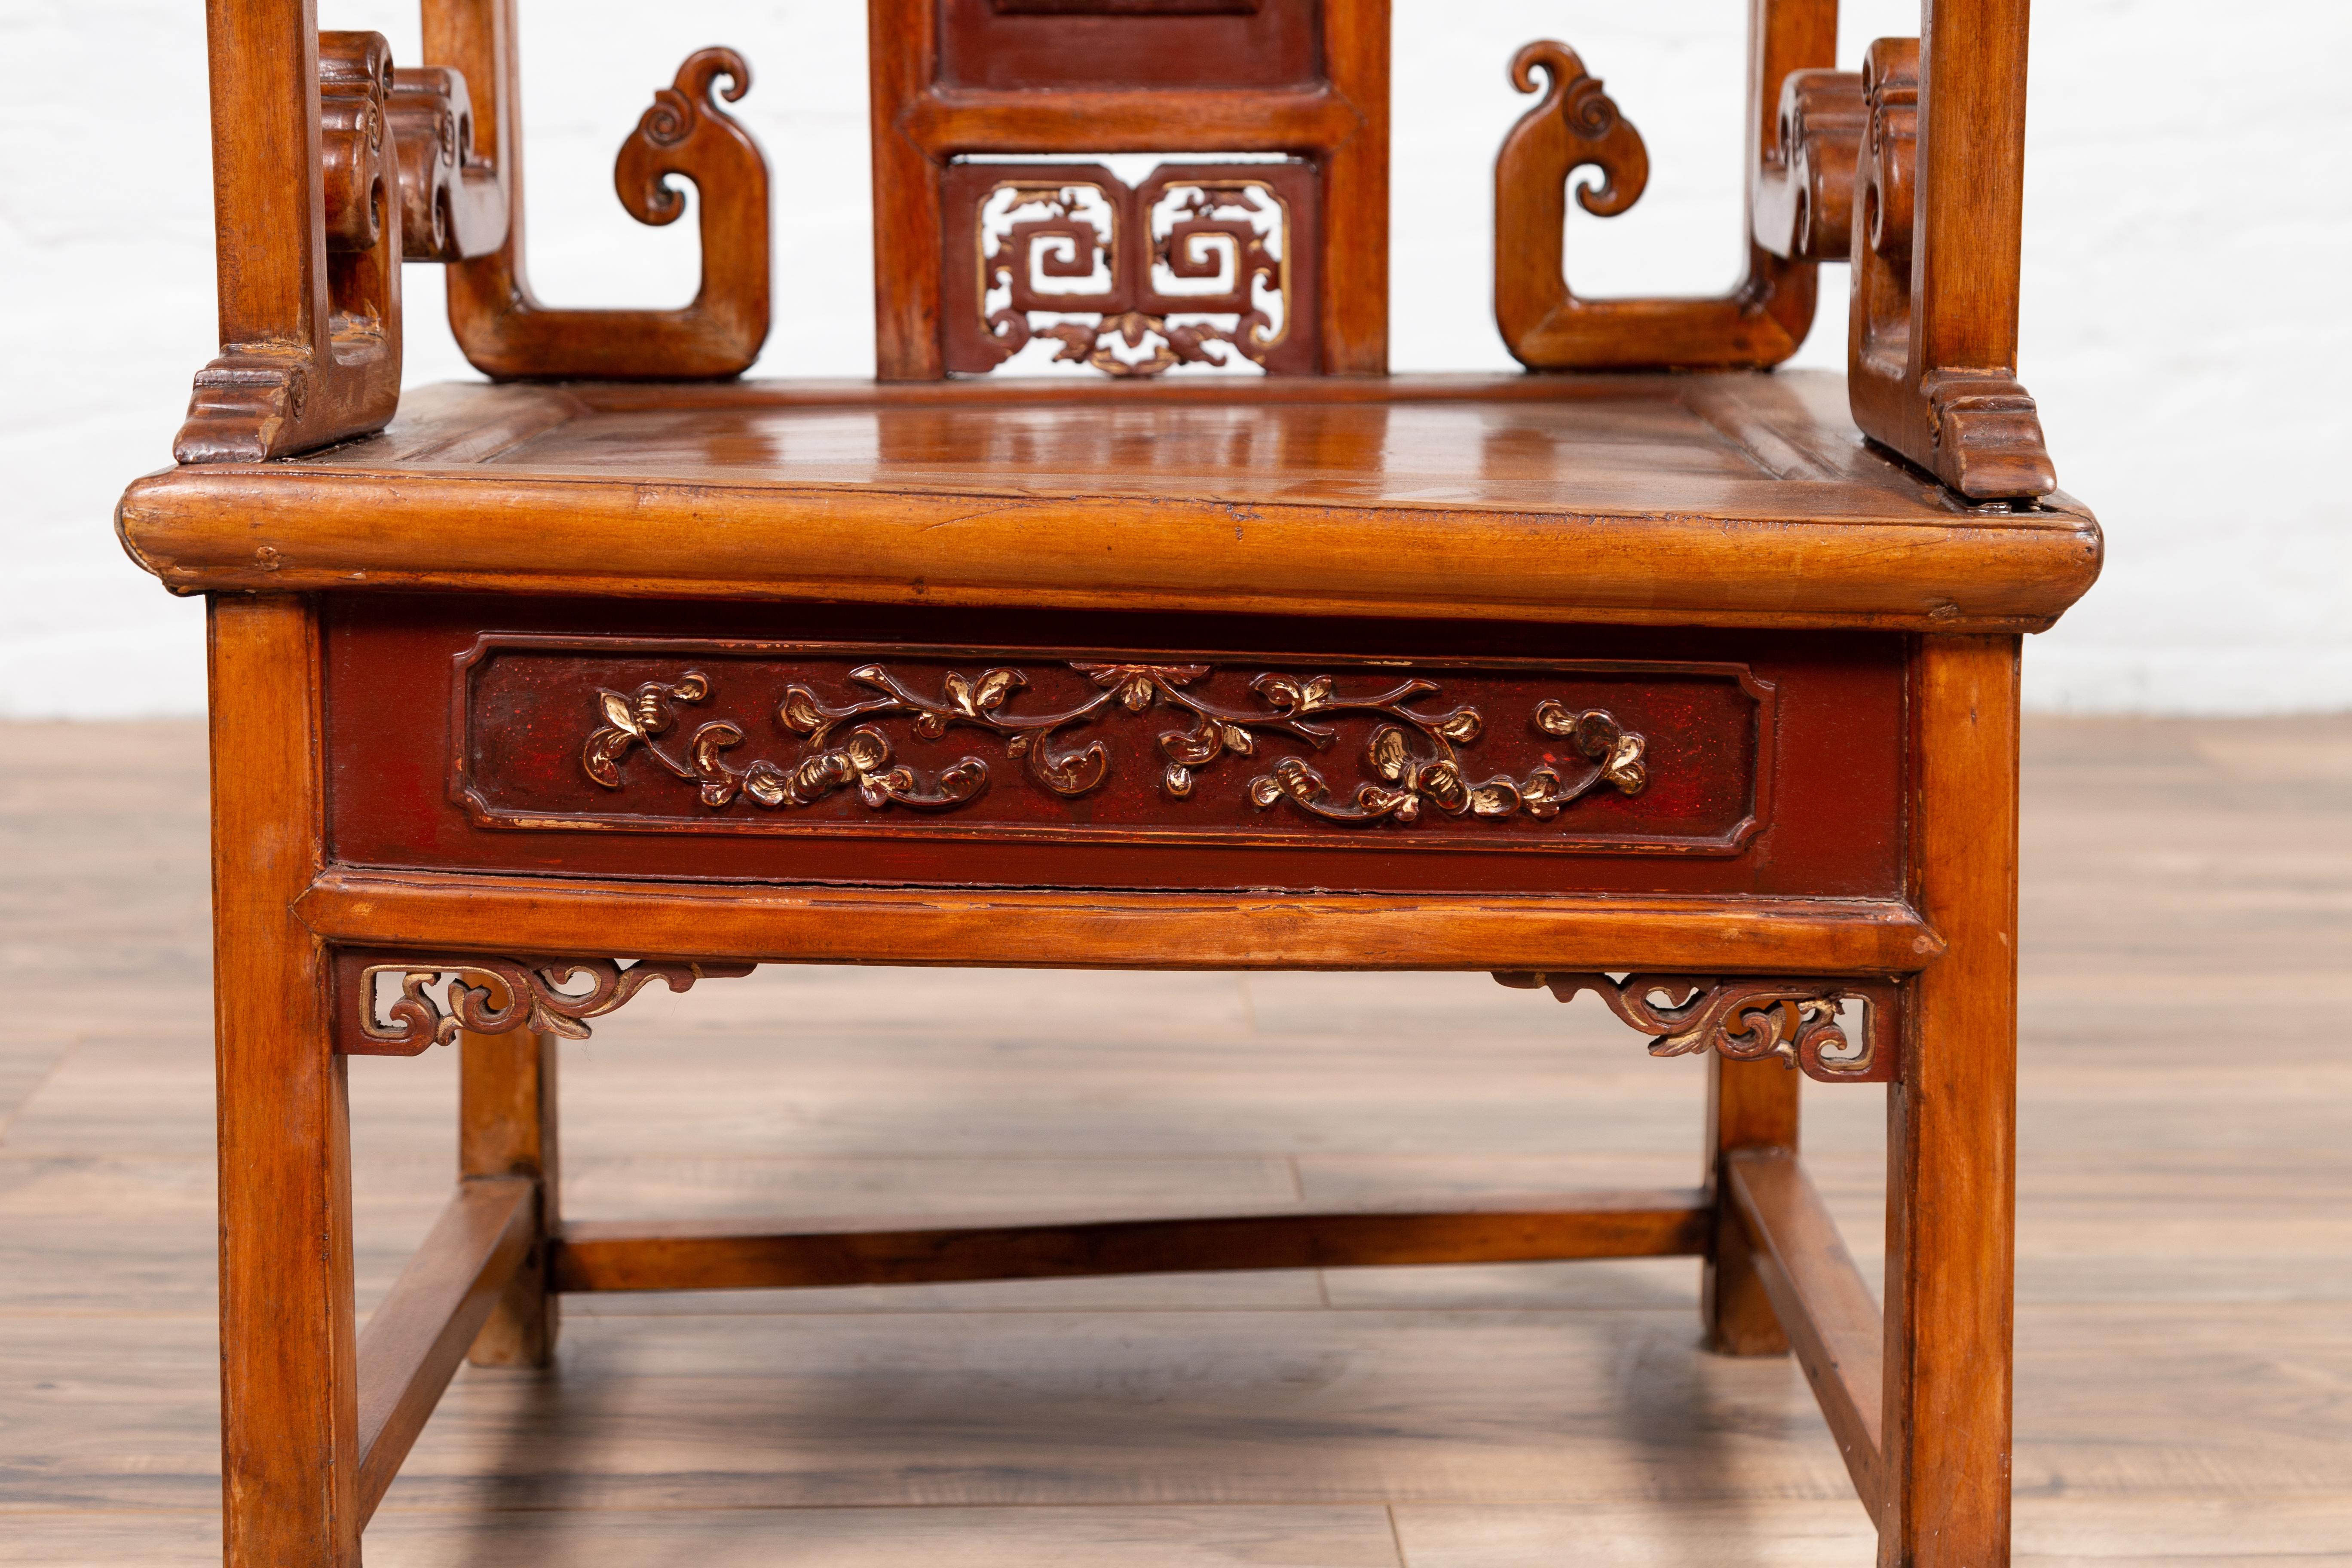 19th Century Hand Carved Antique Chinese Chair with Natural Wood Patina and Scroll Décor